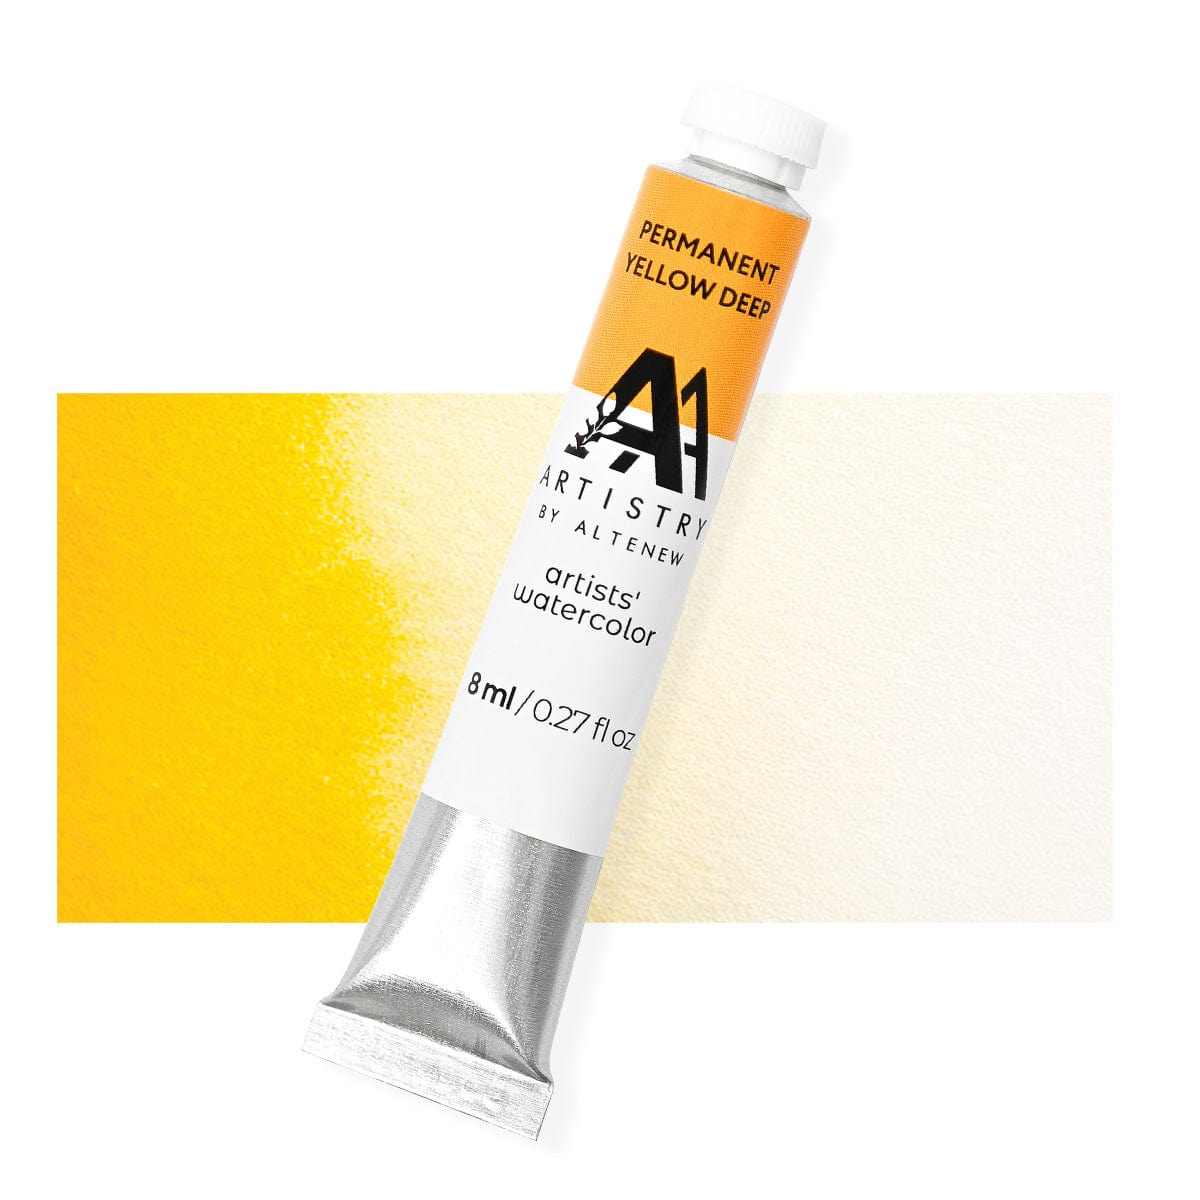 Watercolor Tubes Artists' Watercolor Tube - Permanent Yellow Deep - (PY.65)